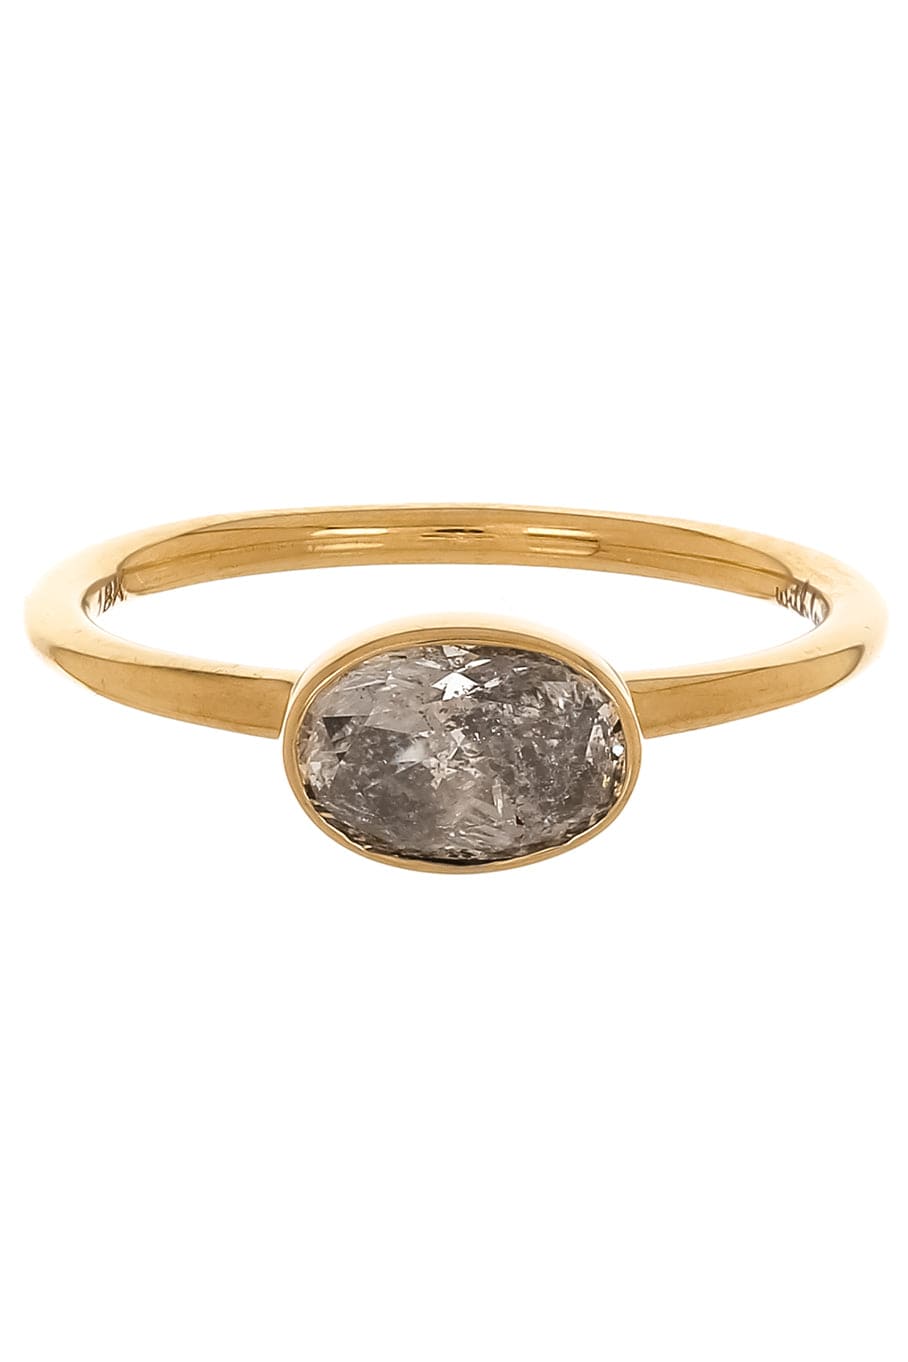 WITH LOVE-The Skinny Ring-YELLOW GOLD